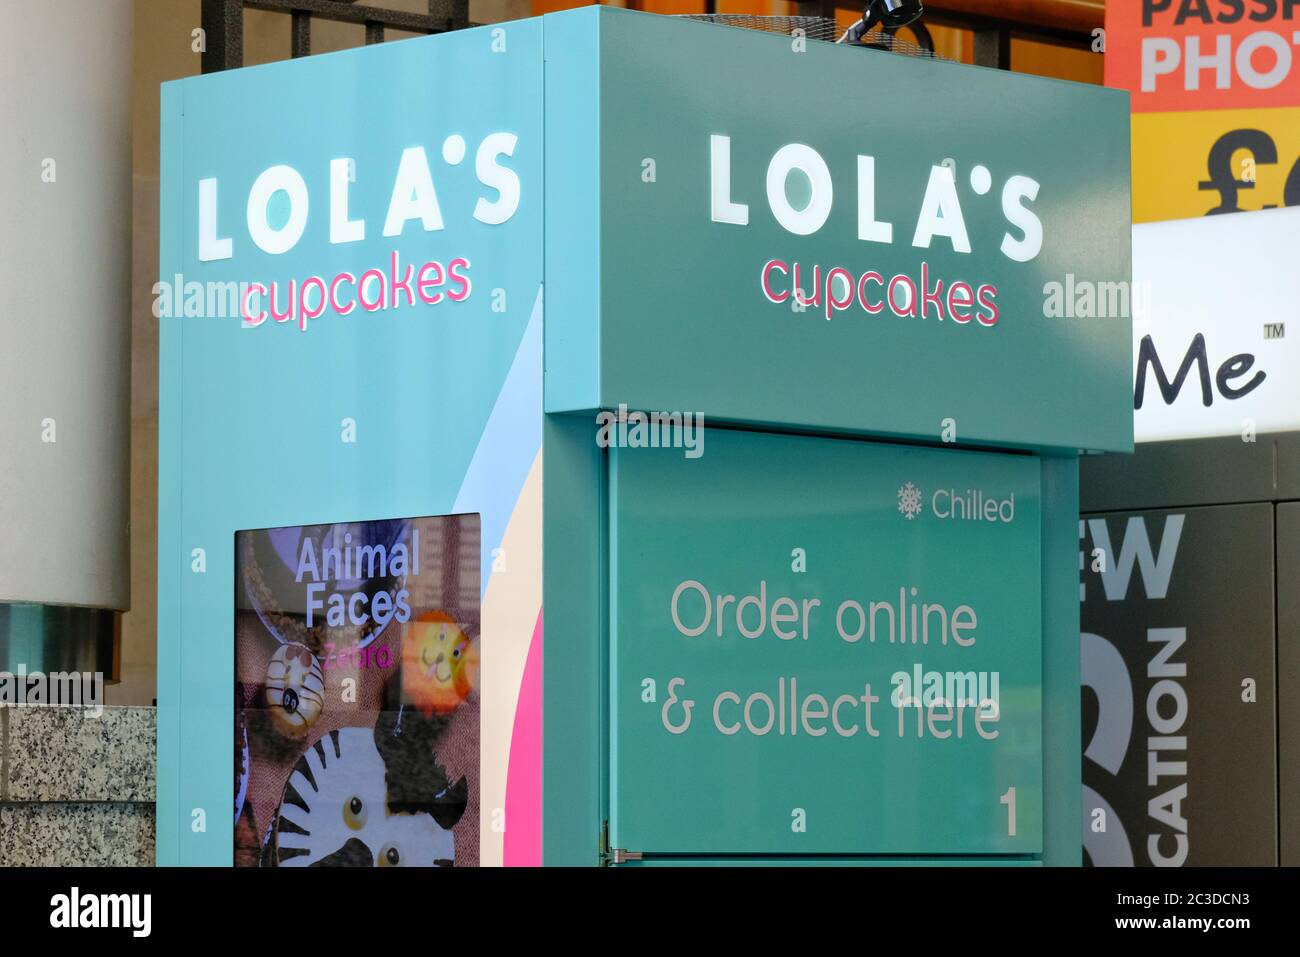 Lola's Cupcakes - order online, click and collect service. Stock Photo